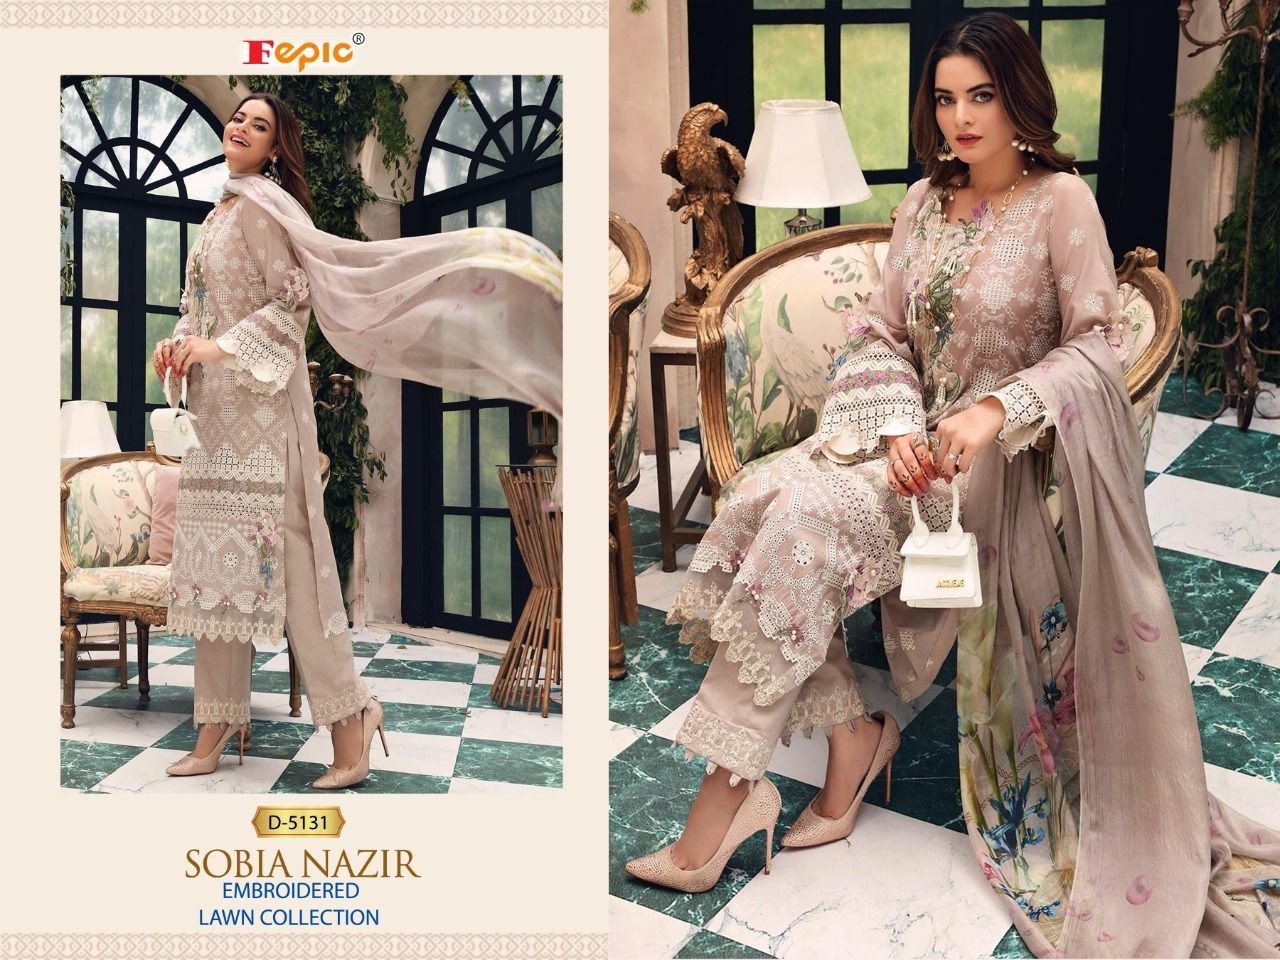 FEPIC ROSEMEEN SOBIA NAZIR EMBROIDERED LAWN COLLECTION D 5131 WHOLESALER SINGALE